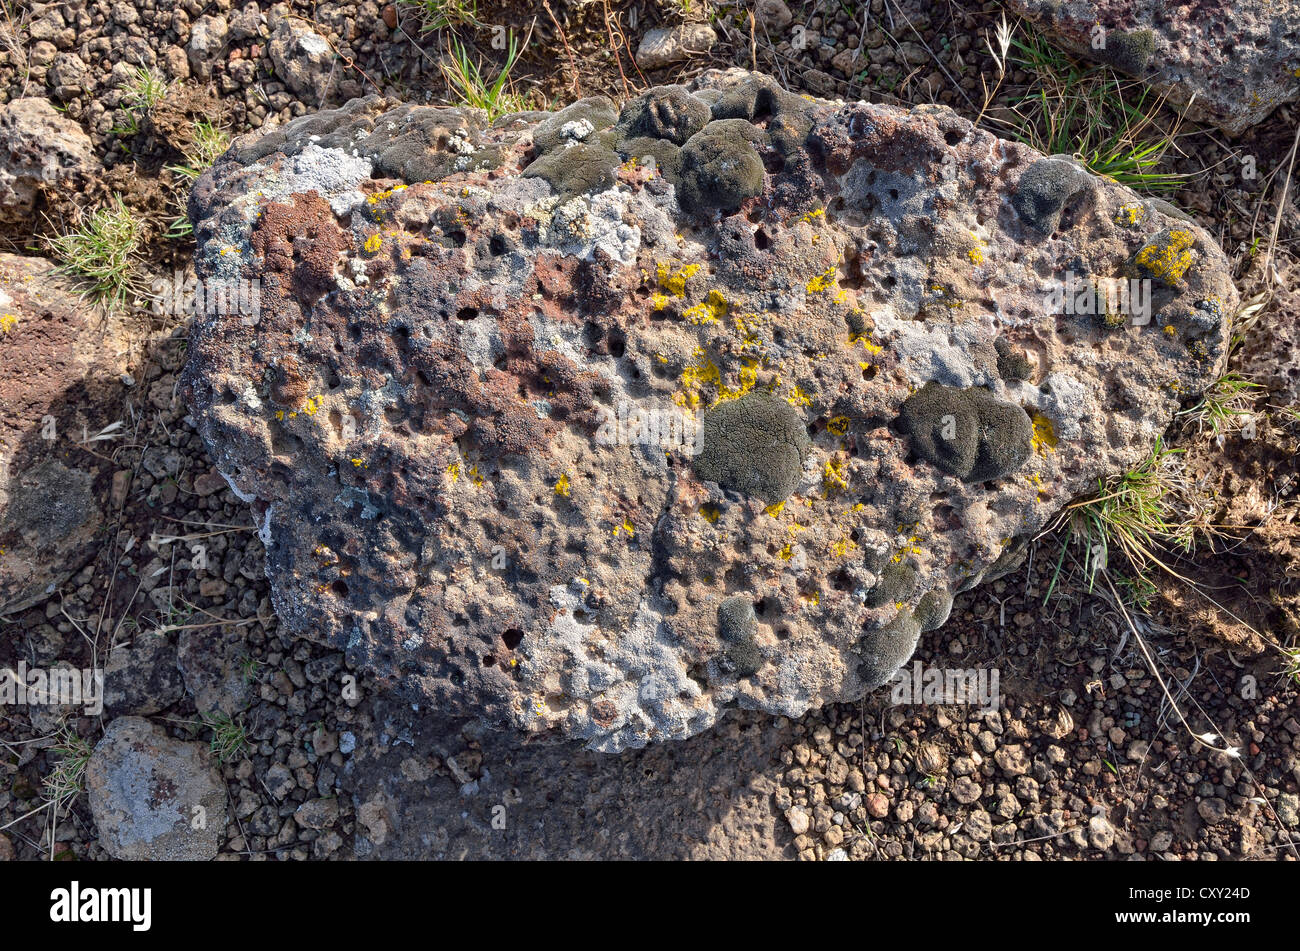 Lava boulders covered with various lichens, Bennet Hills, Gooding, Highway 46, Idaho, USA Stock Photo